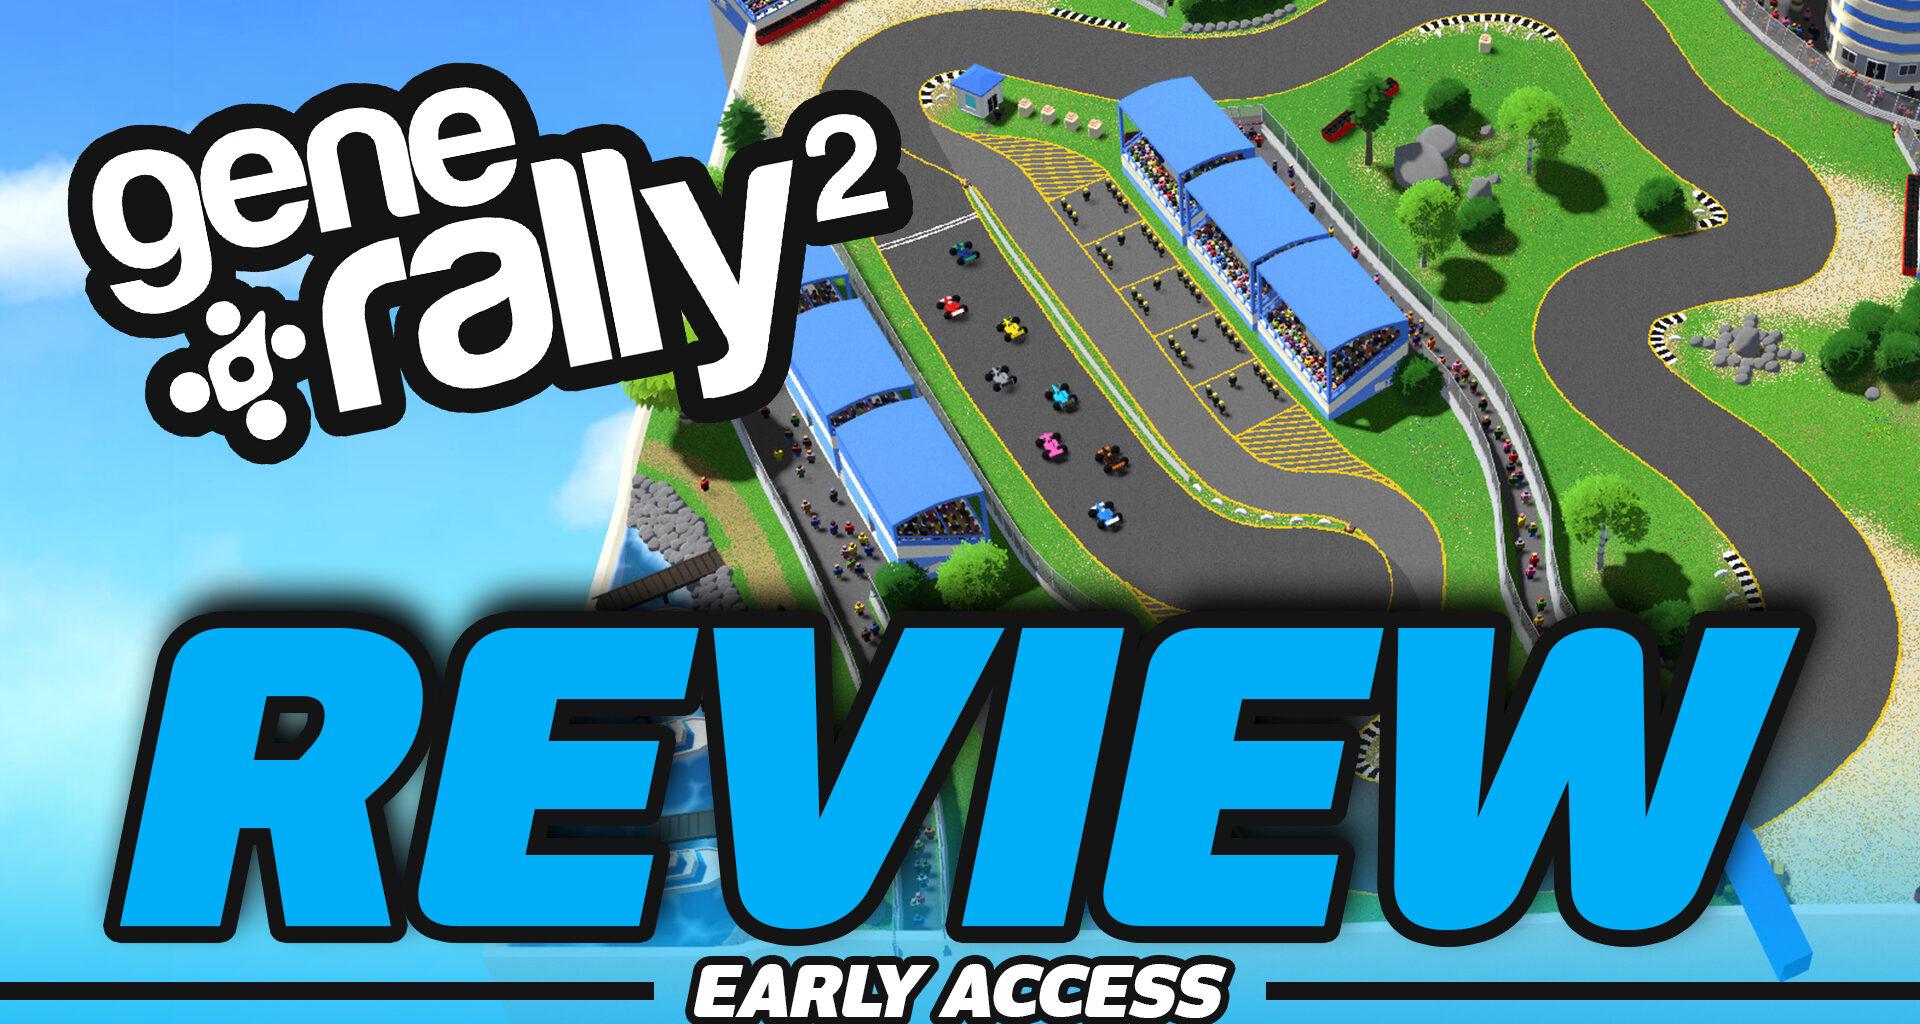 GeneRally 2 Early Access review: simple, yet effective